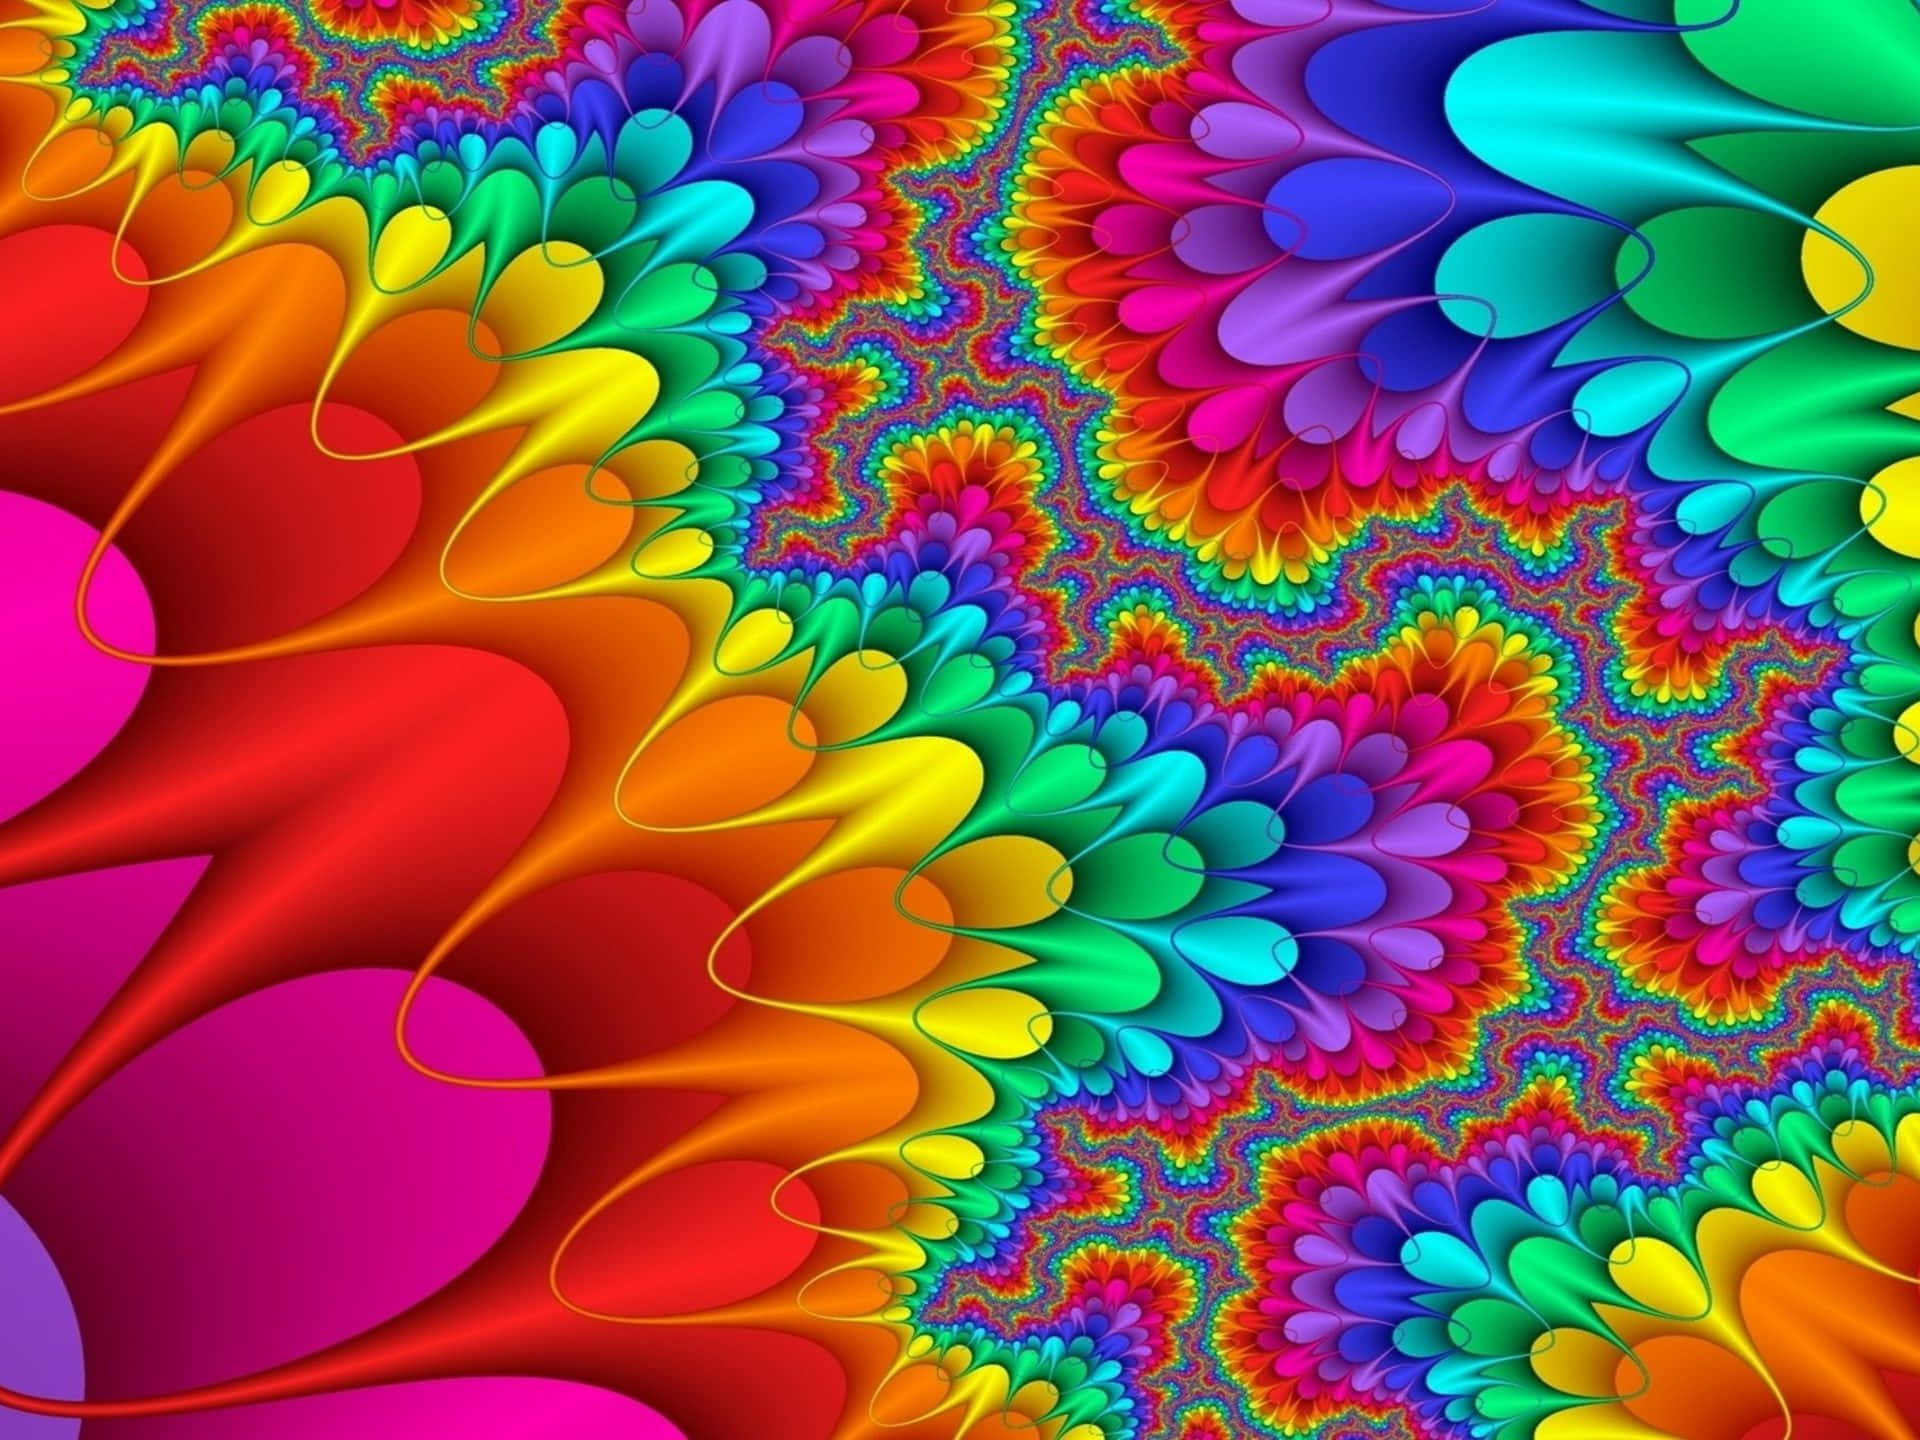 A Colorful Fractal Pattern With Colorful Flowers